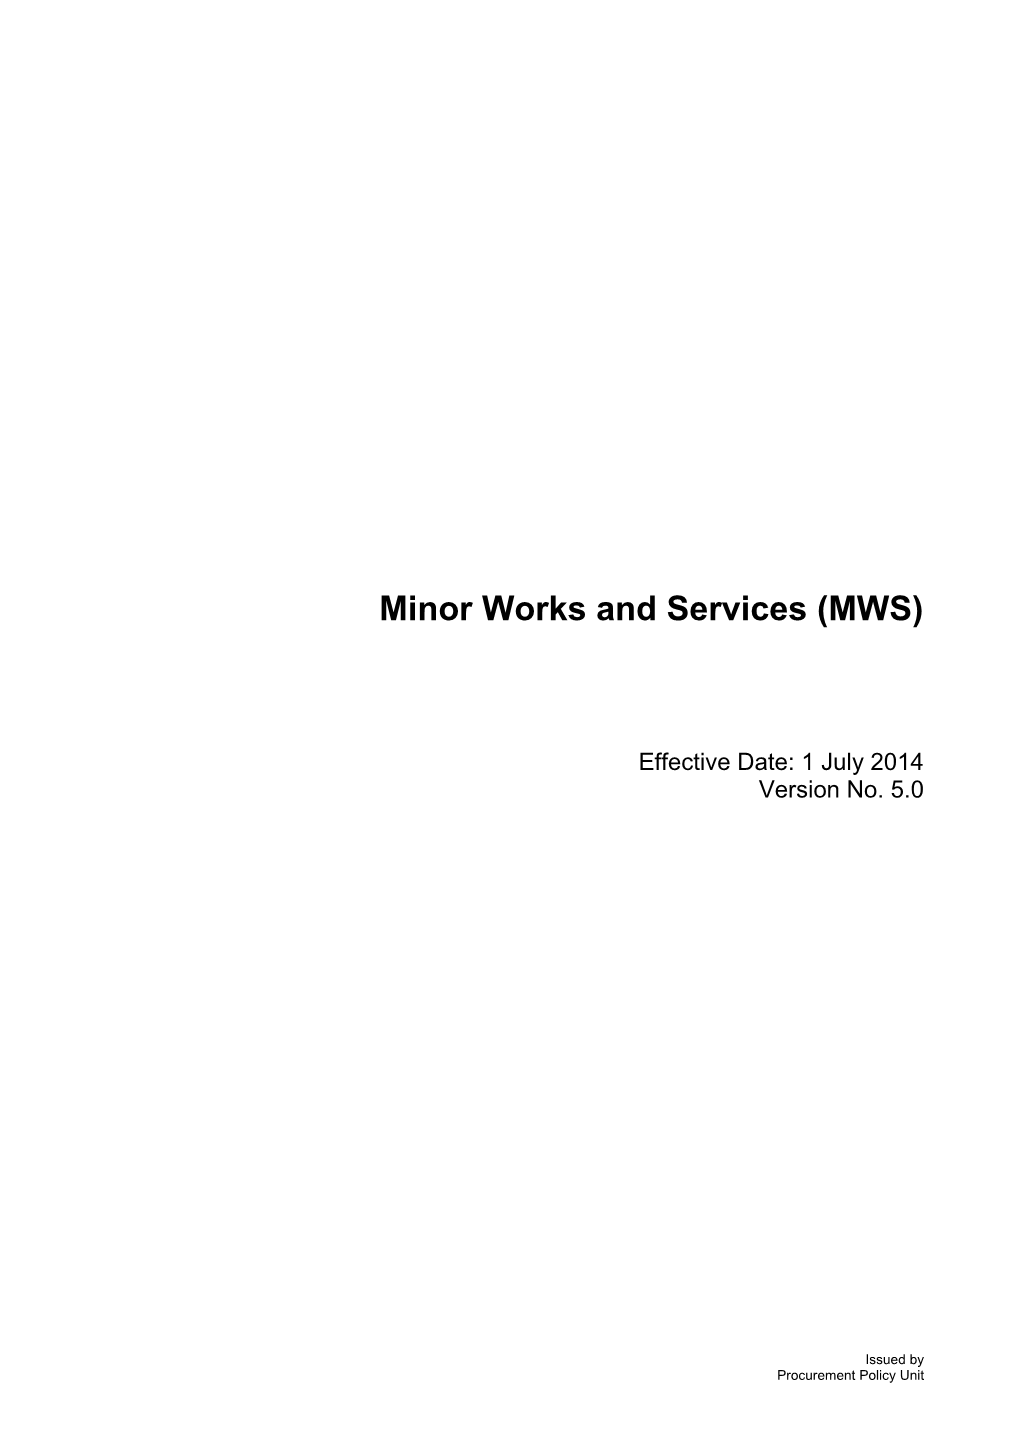 Conditions of Contract MWS - (V 5.0) (1 July 2014)